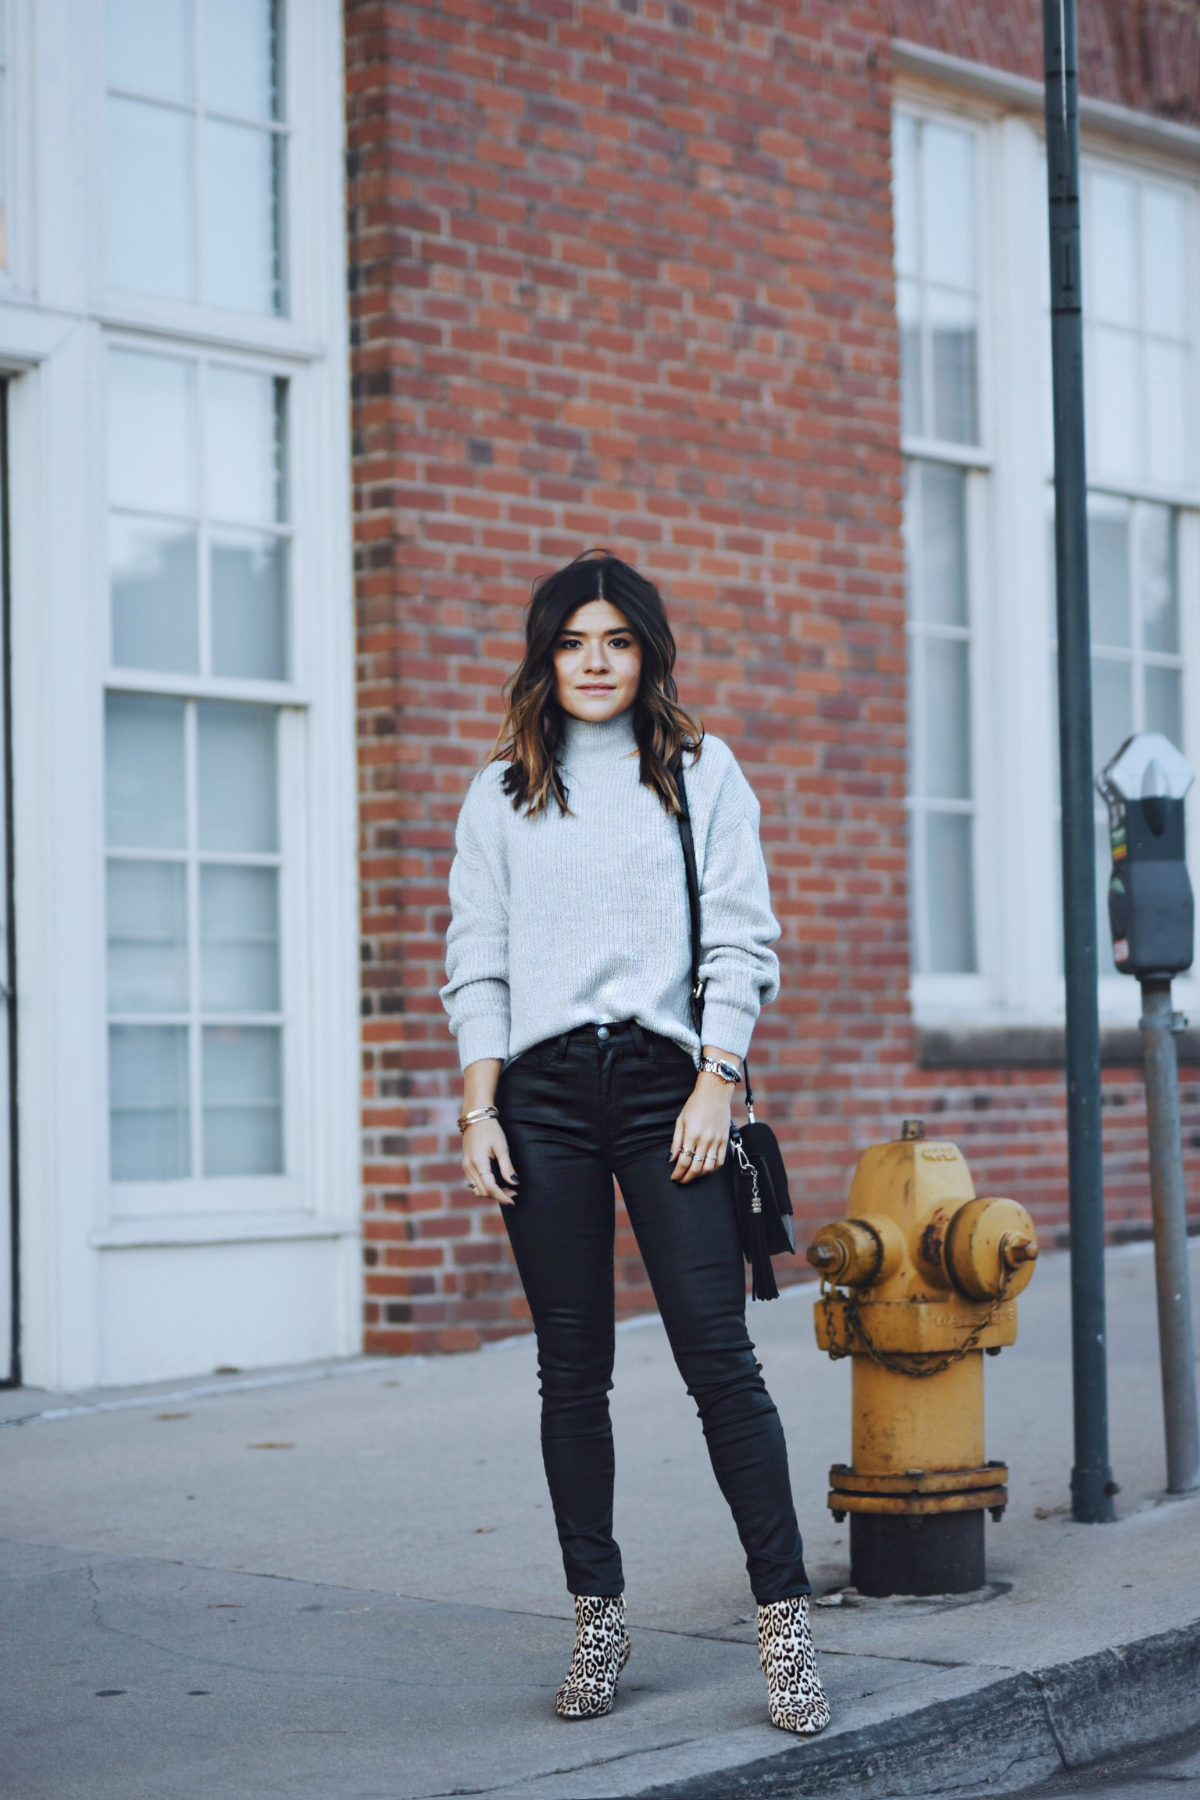 Carolina Hellal of Chic Talk wearing a Nordstrom sweater, Current Elliot waxed jeans and Sam Edelman booties